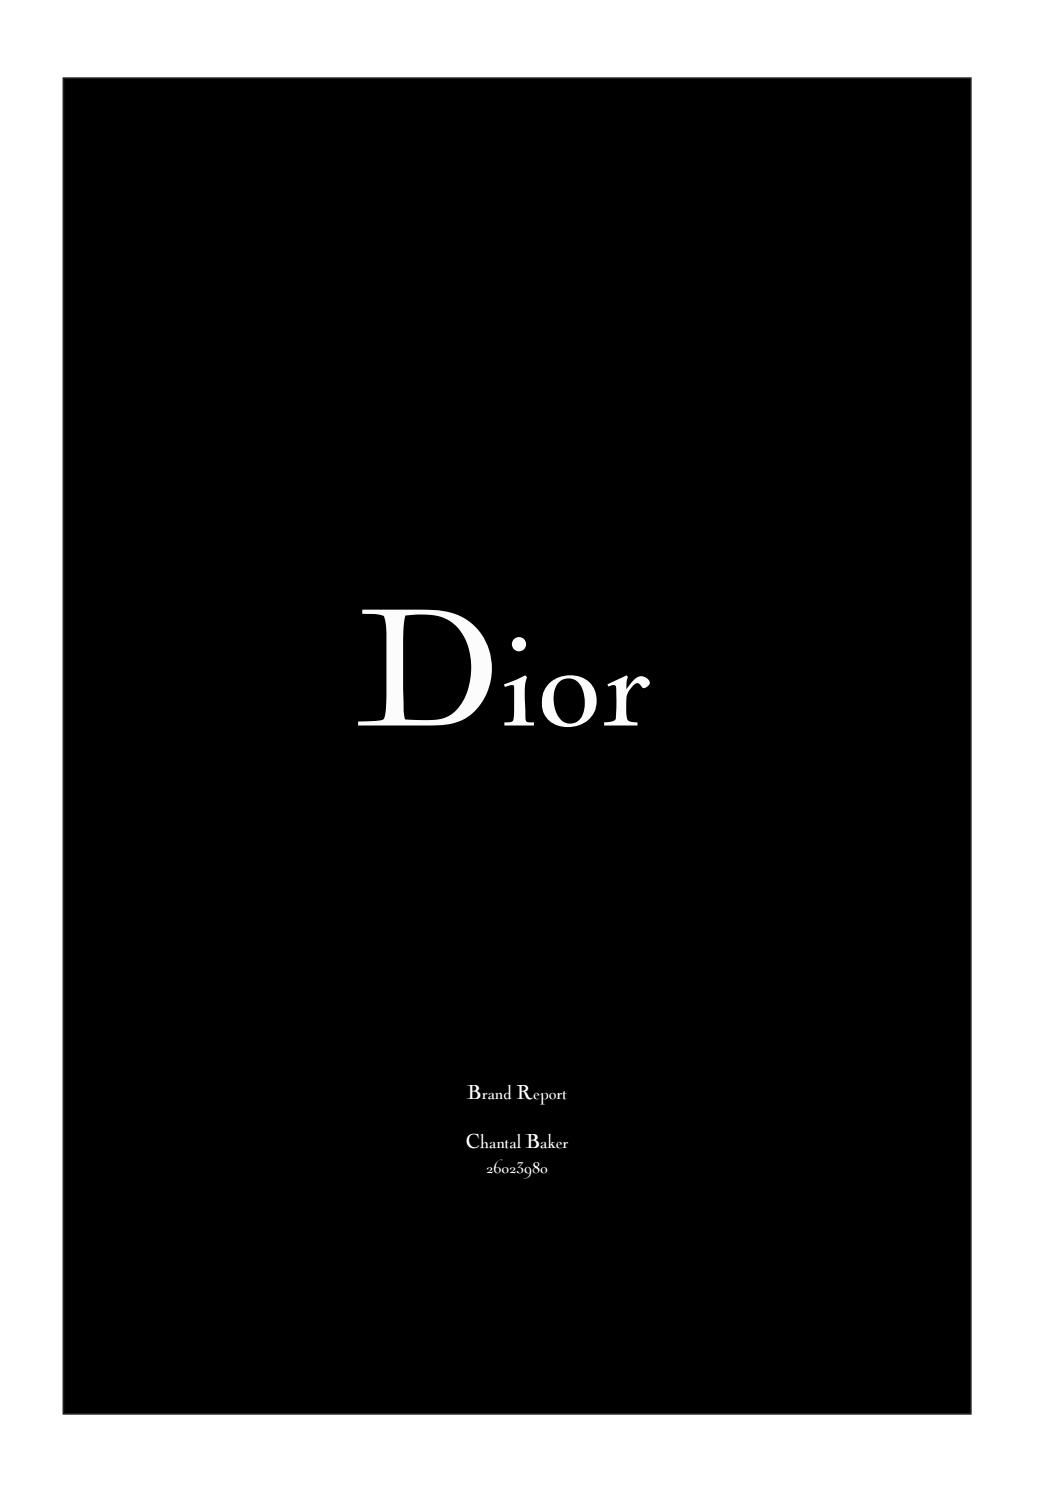 Brand Report: Dior | Chanel wallpapers, Black and white picture wall